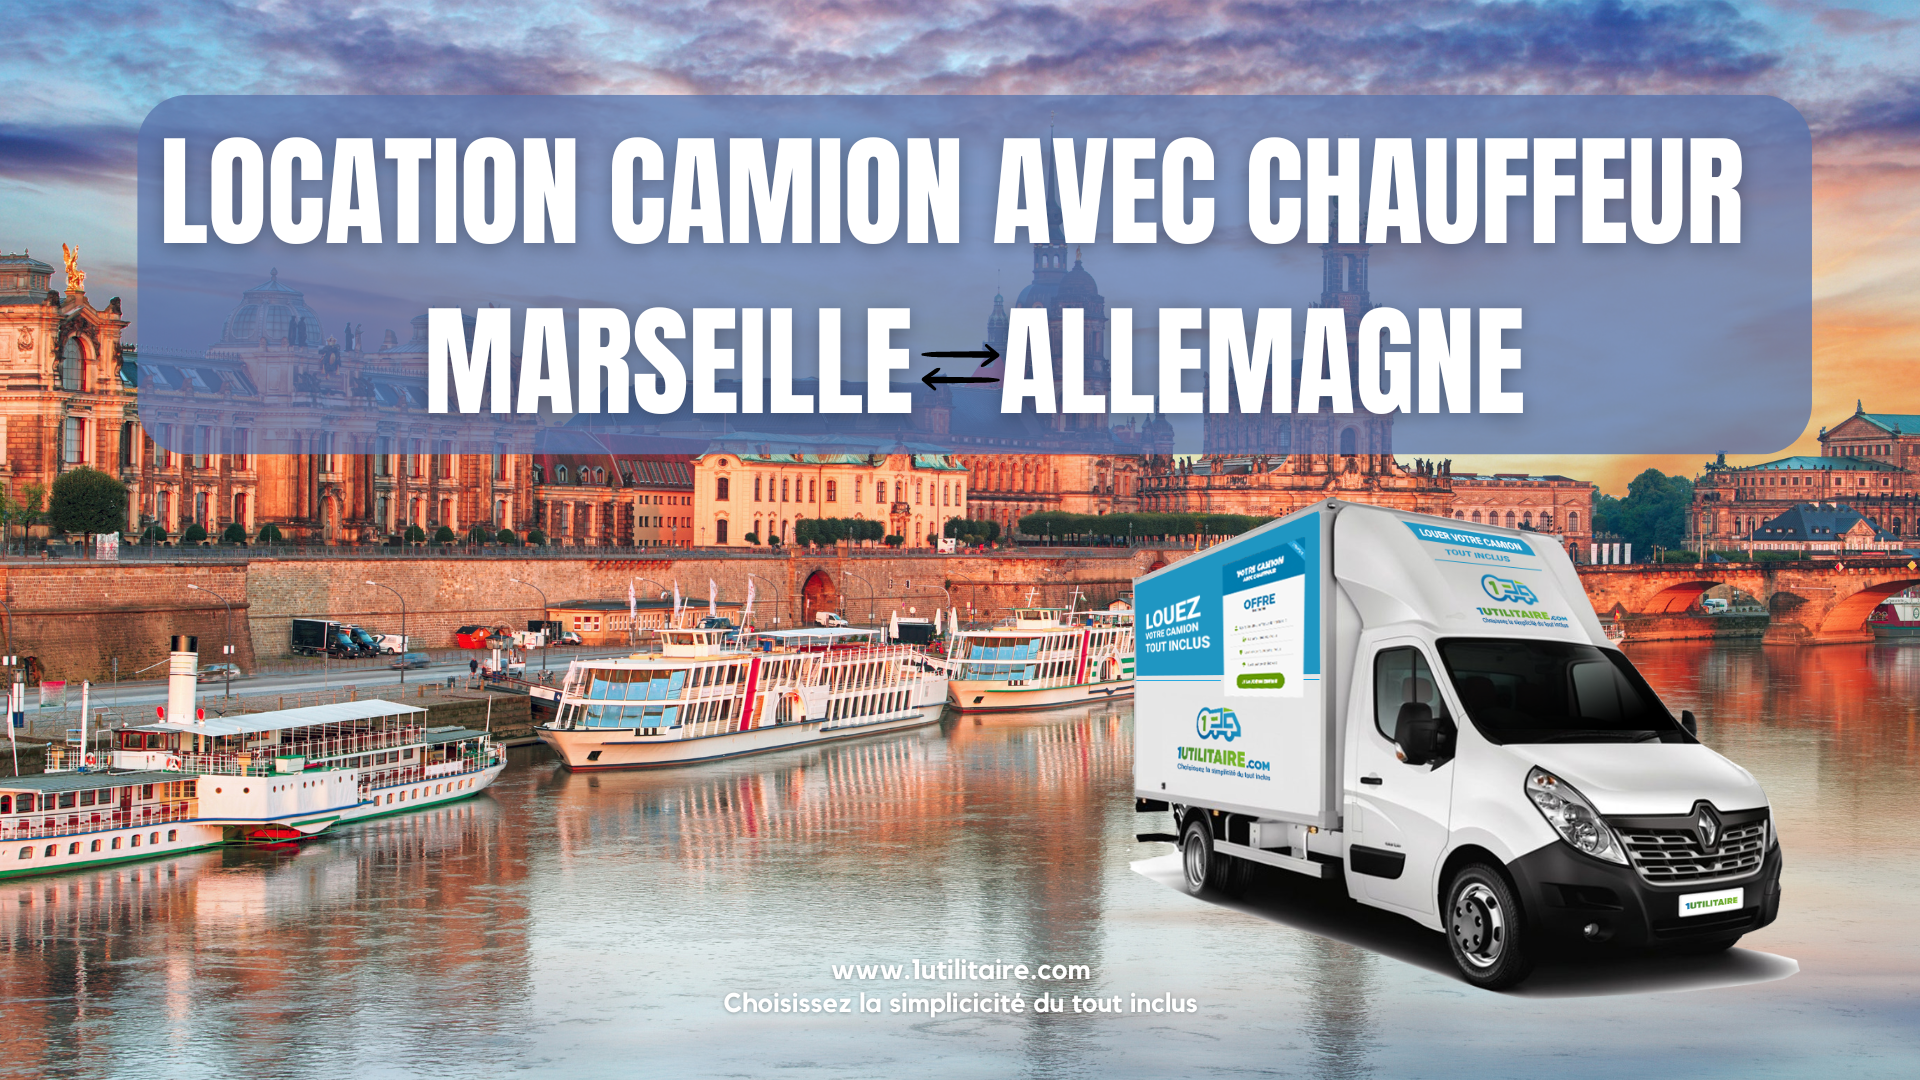 Location camion ave chauffeur Marseille - Allemagne